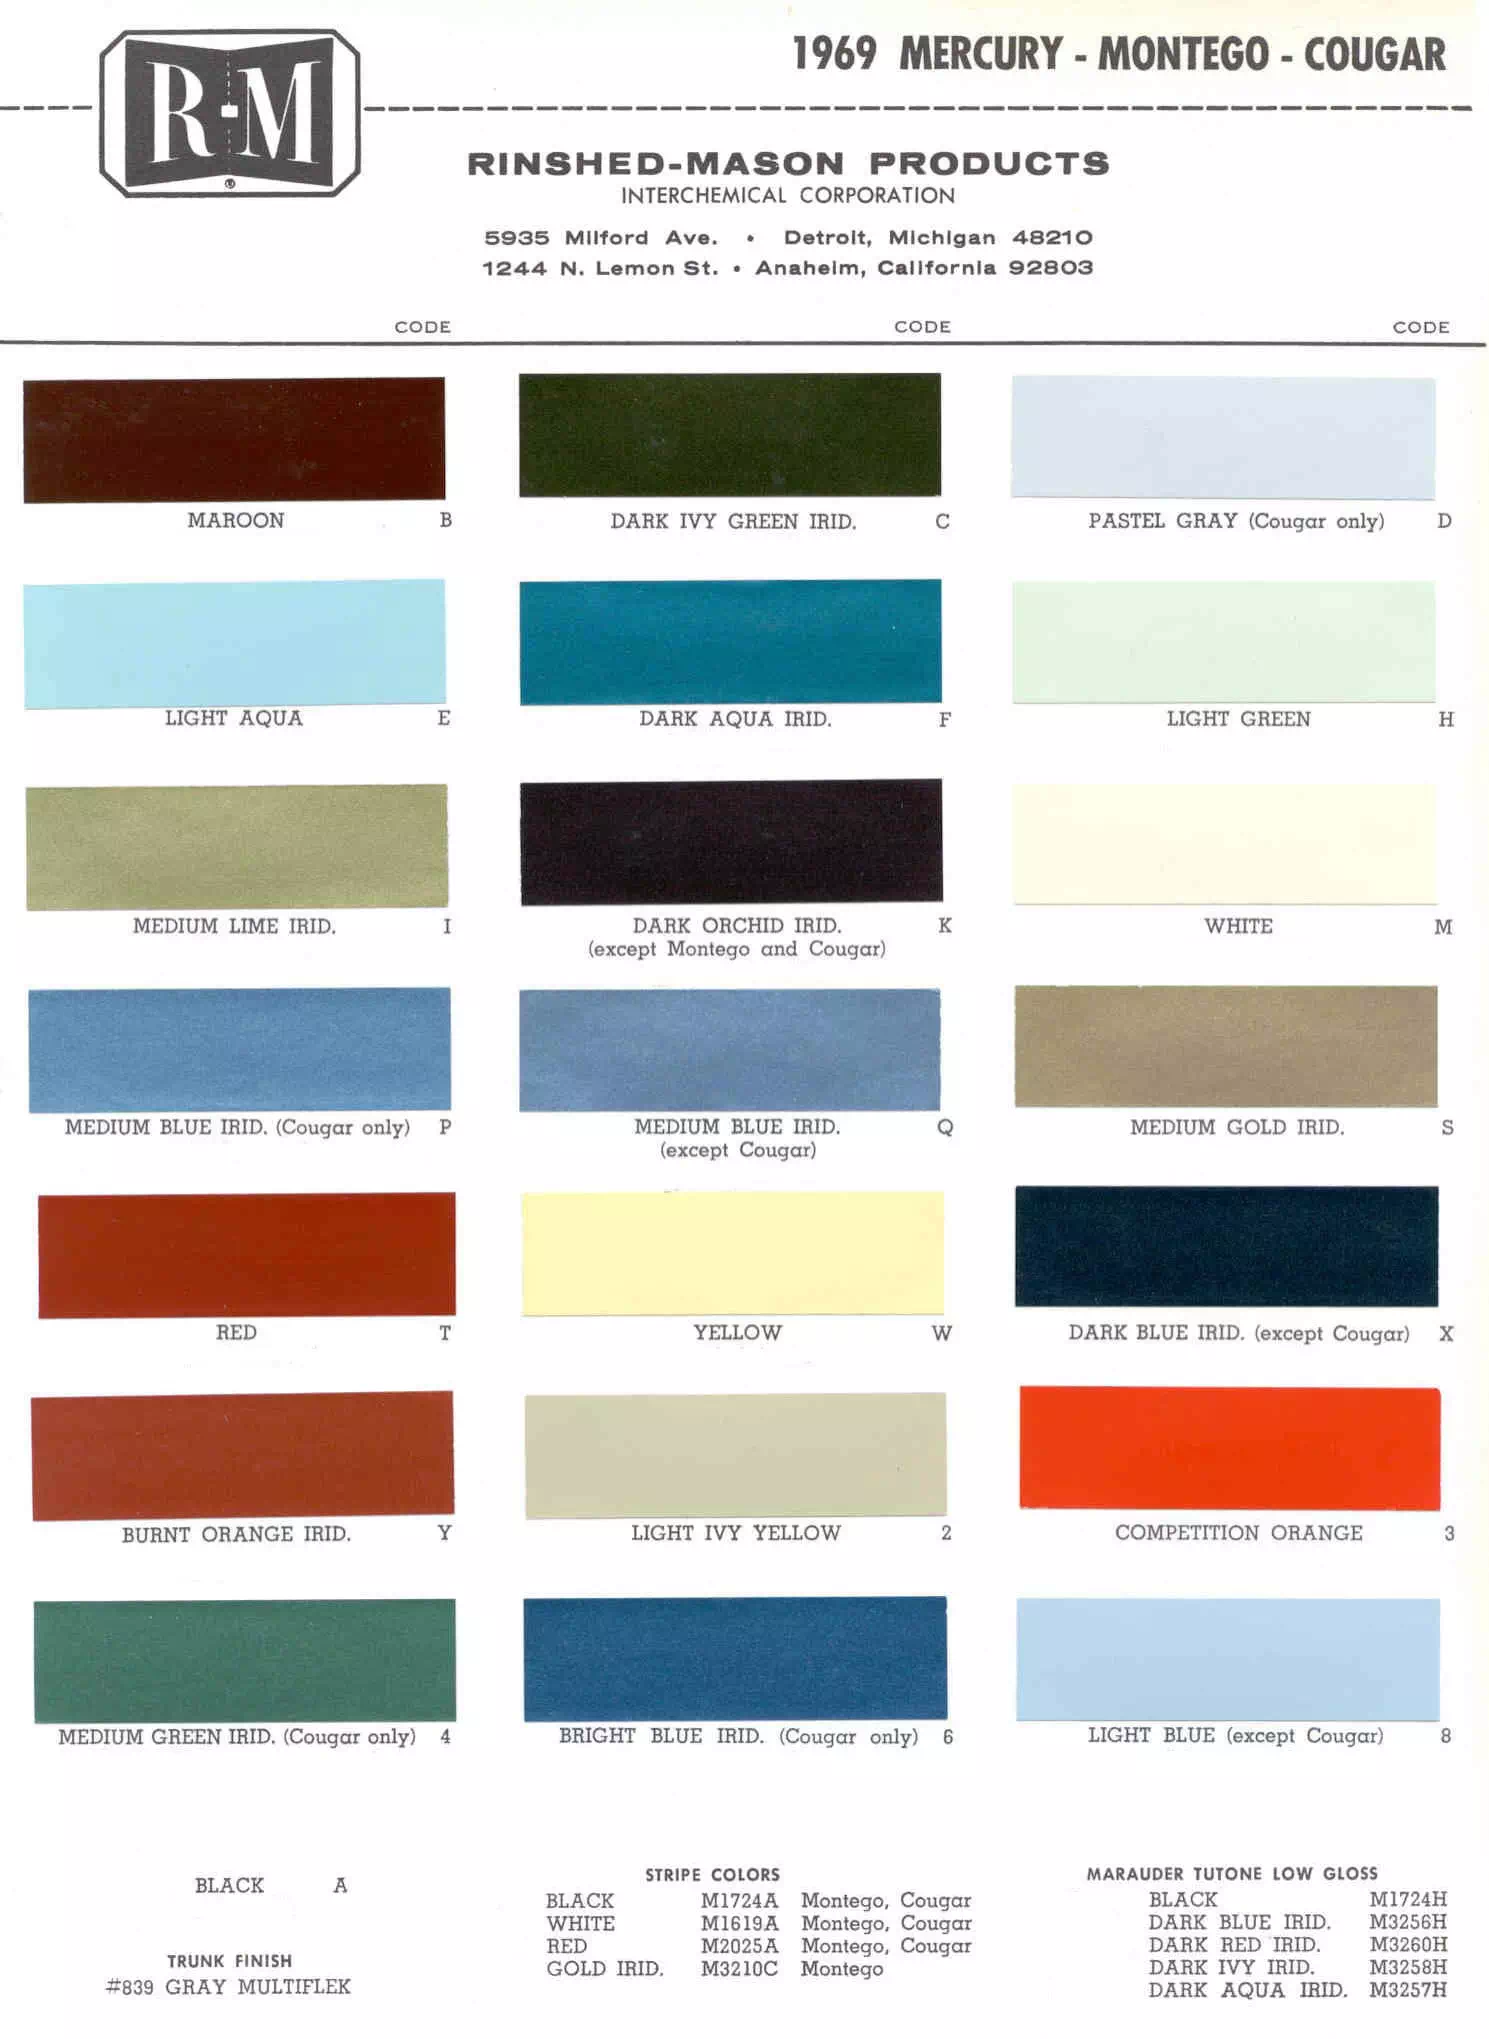 Color examples, Ordering Codes, OEM Paint Code, Color Swatches, and Color Names for the Ford Motor Company in 1969